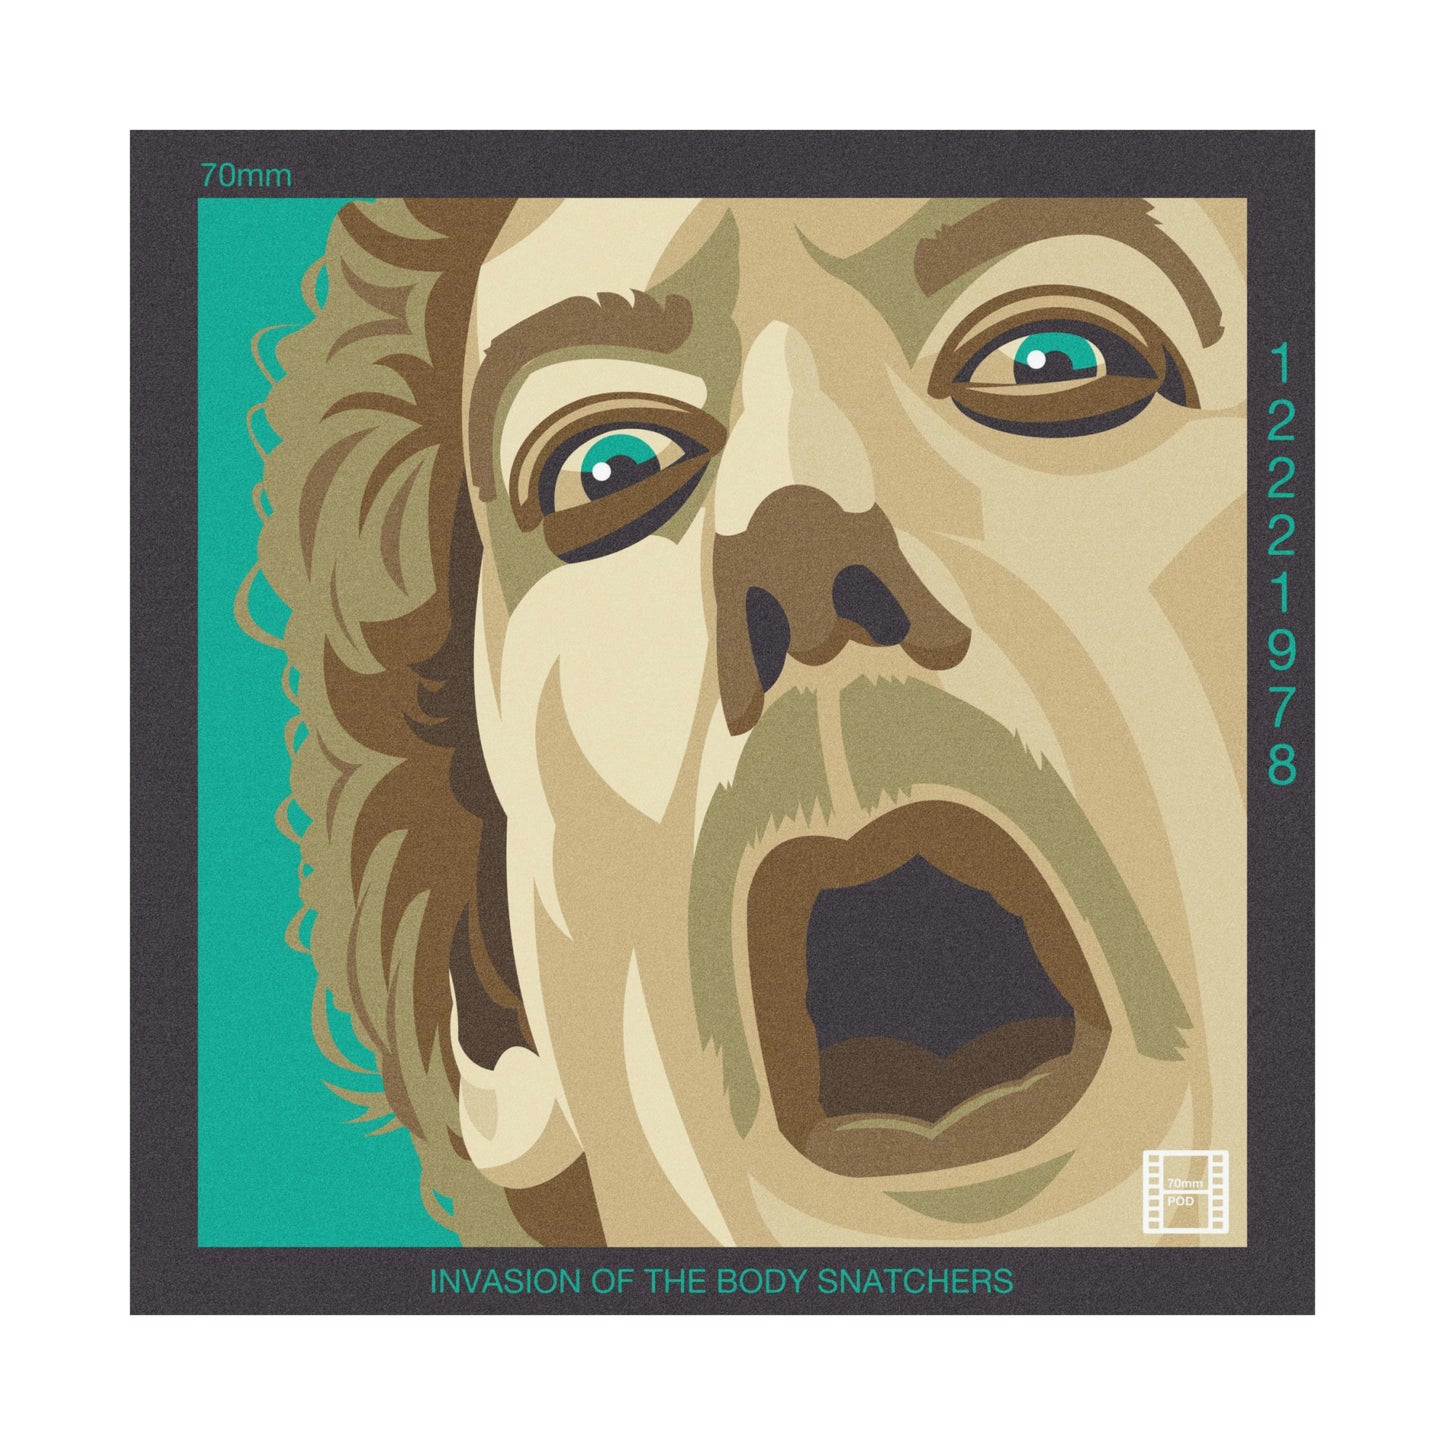 Episode 038: Invasion of the Body Snatchers (1978)